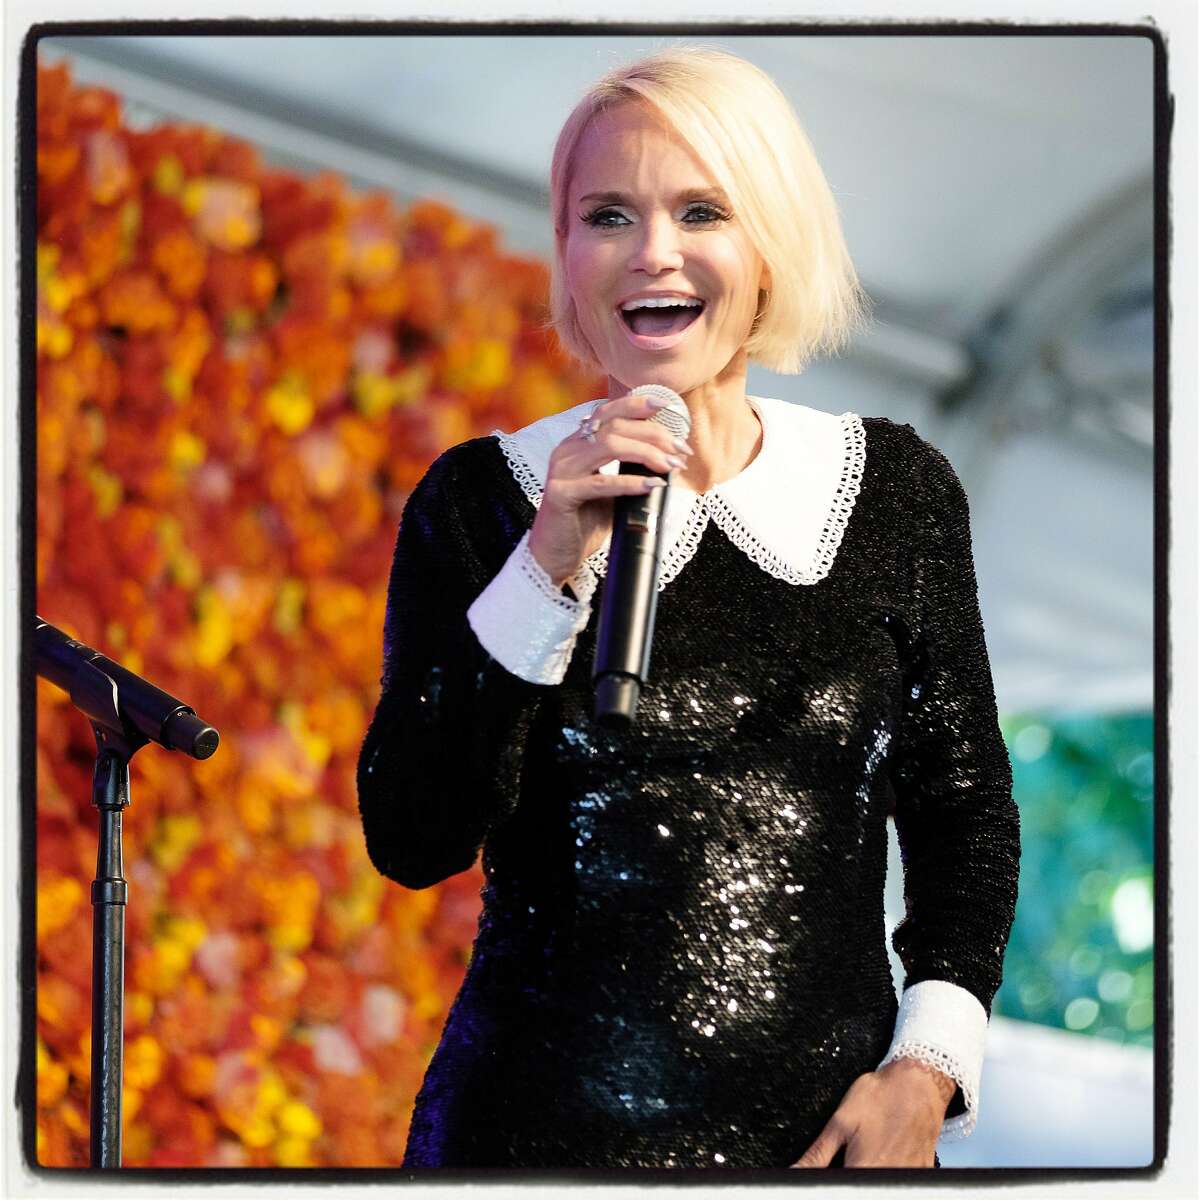 Kristin Chenoweth performs at Festival Napa Valley's Arts for All gala. July 22, 2018.